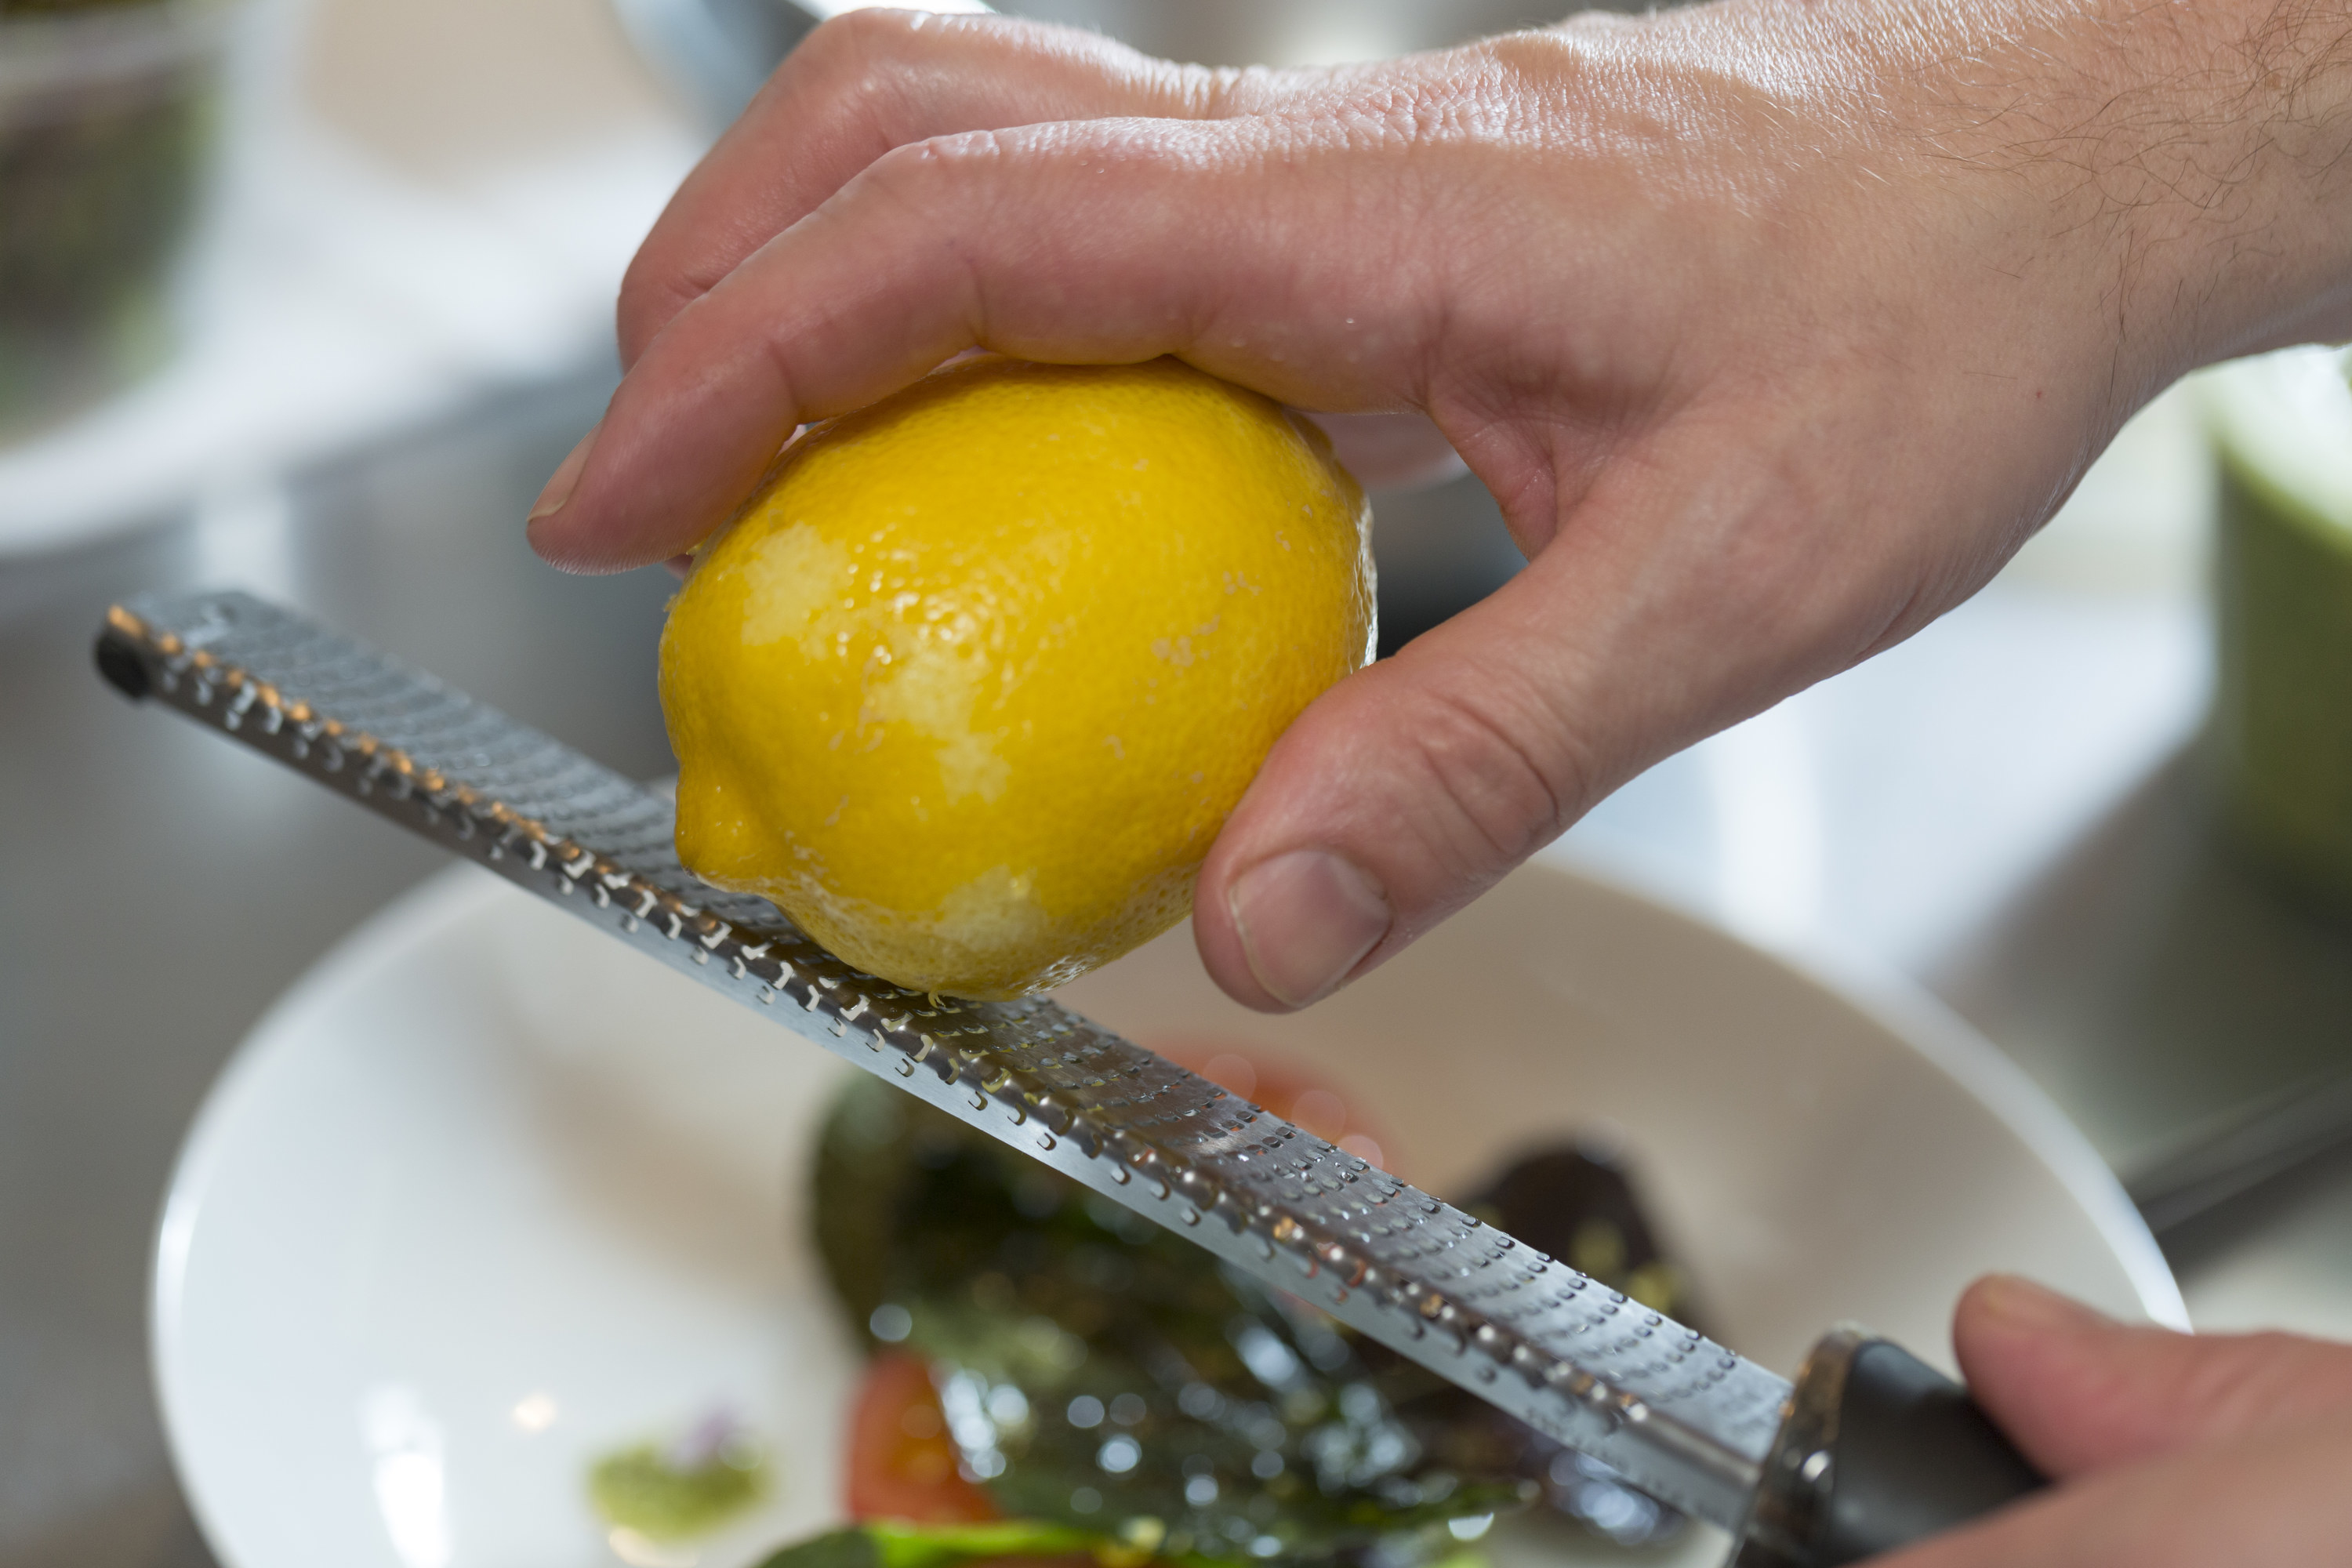 Zesting a lemon on a microplane over a bowl of food